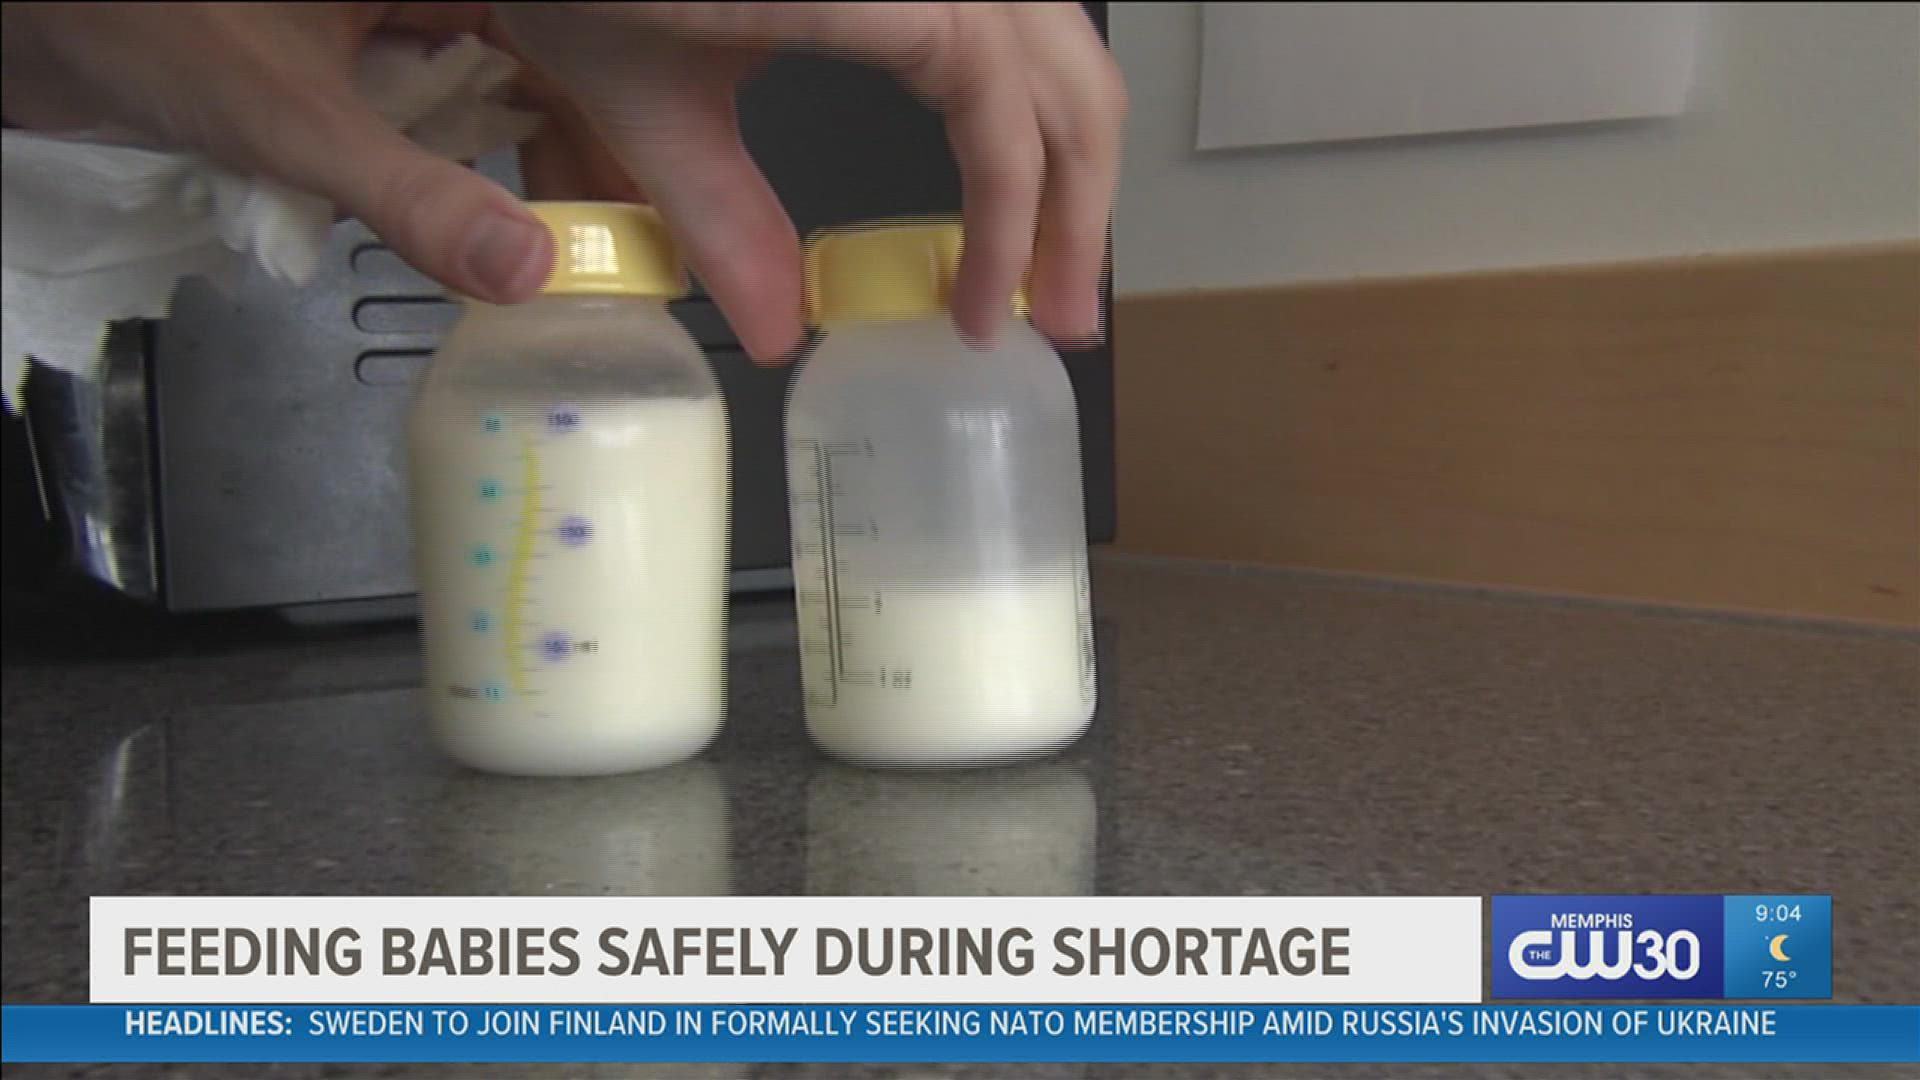 When your baby needs to eat, here's what a nurse practitioner said to do to keep your family safe.